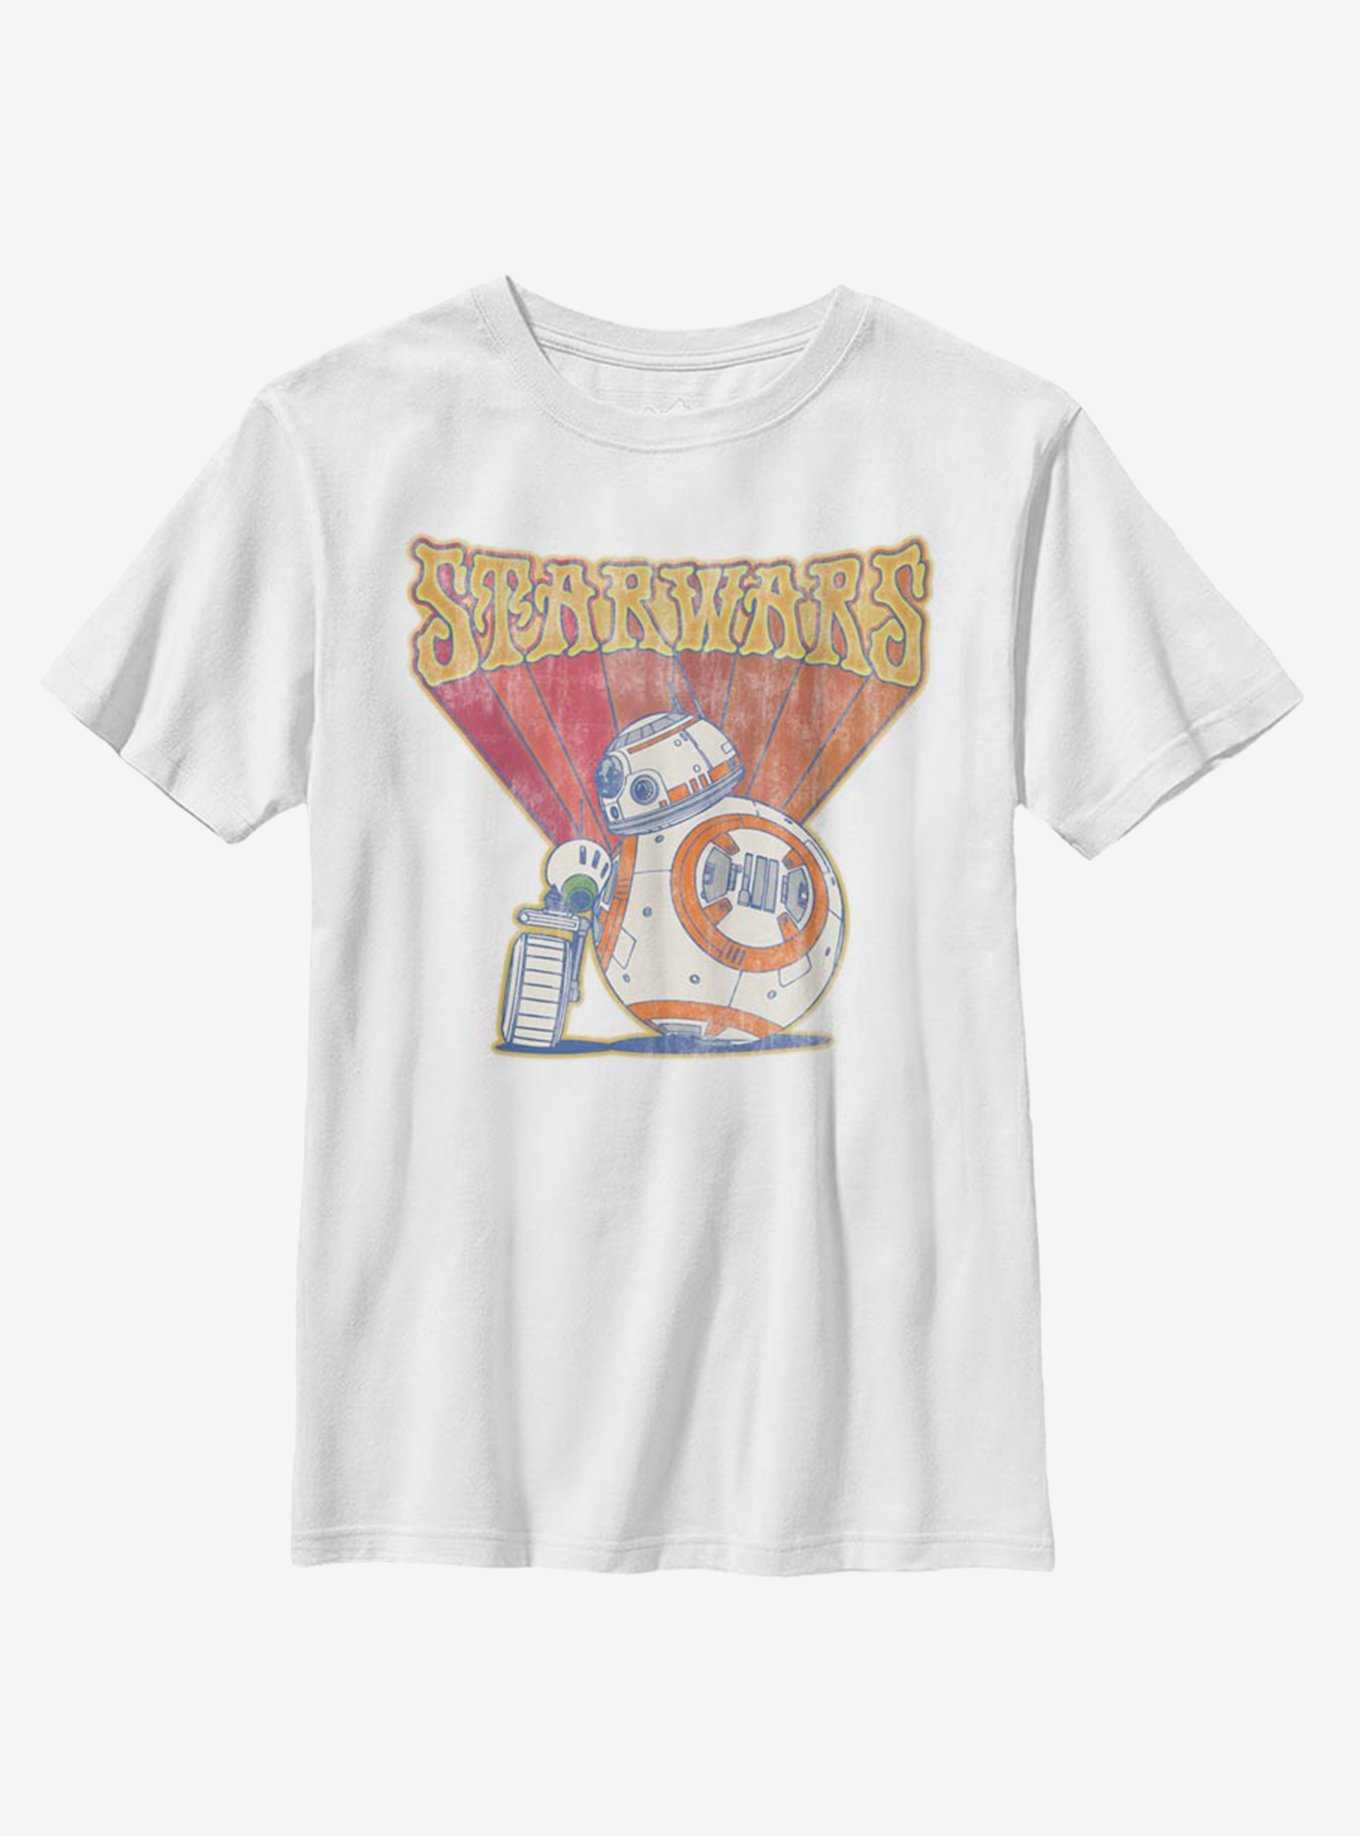 Star Wars Episode IX The Rise Of Skywalker BB-8 Retro Youth T-Shirt, , hi-res